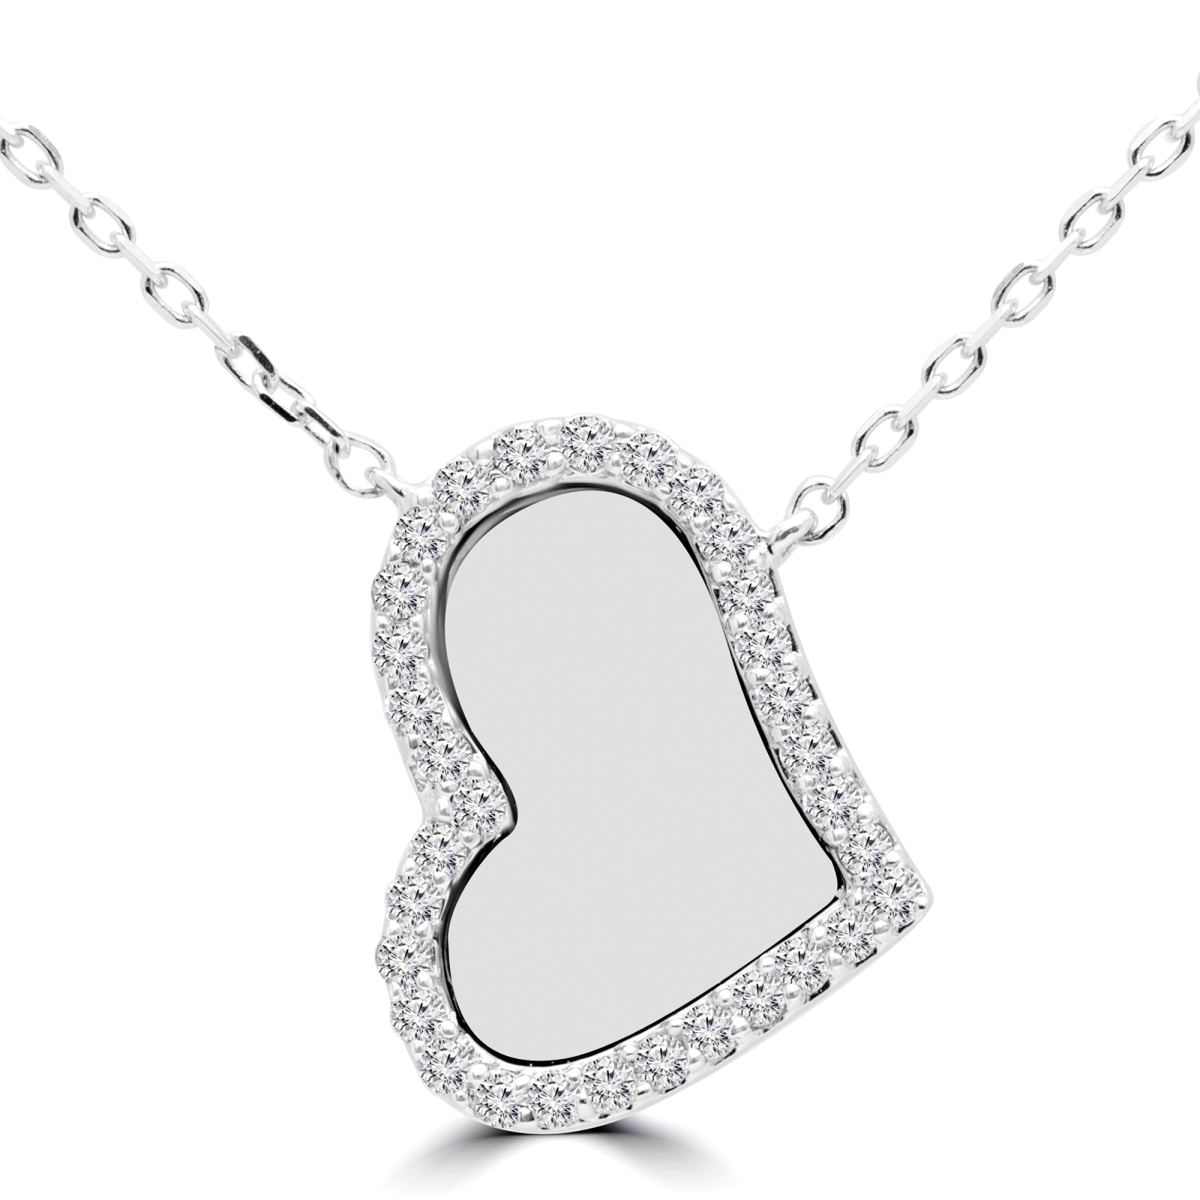 Mdr170158 0.16 Ctw Round Diamond Heart Pendant Necklace In 14k